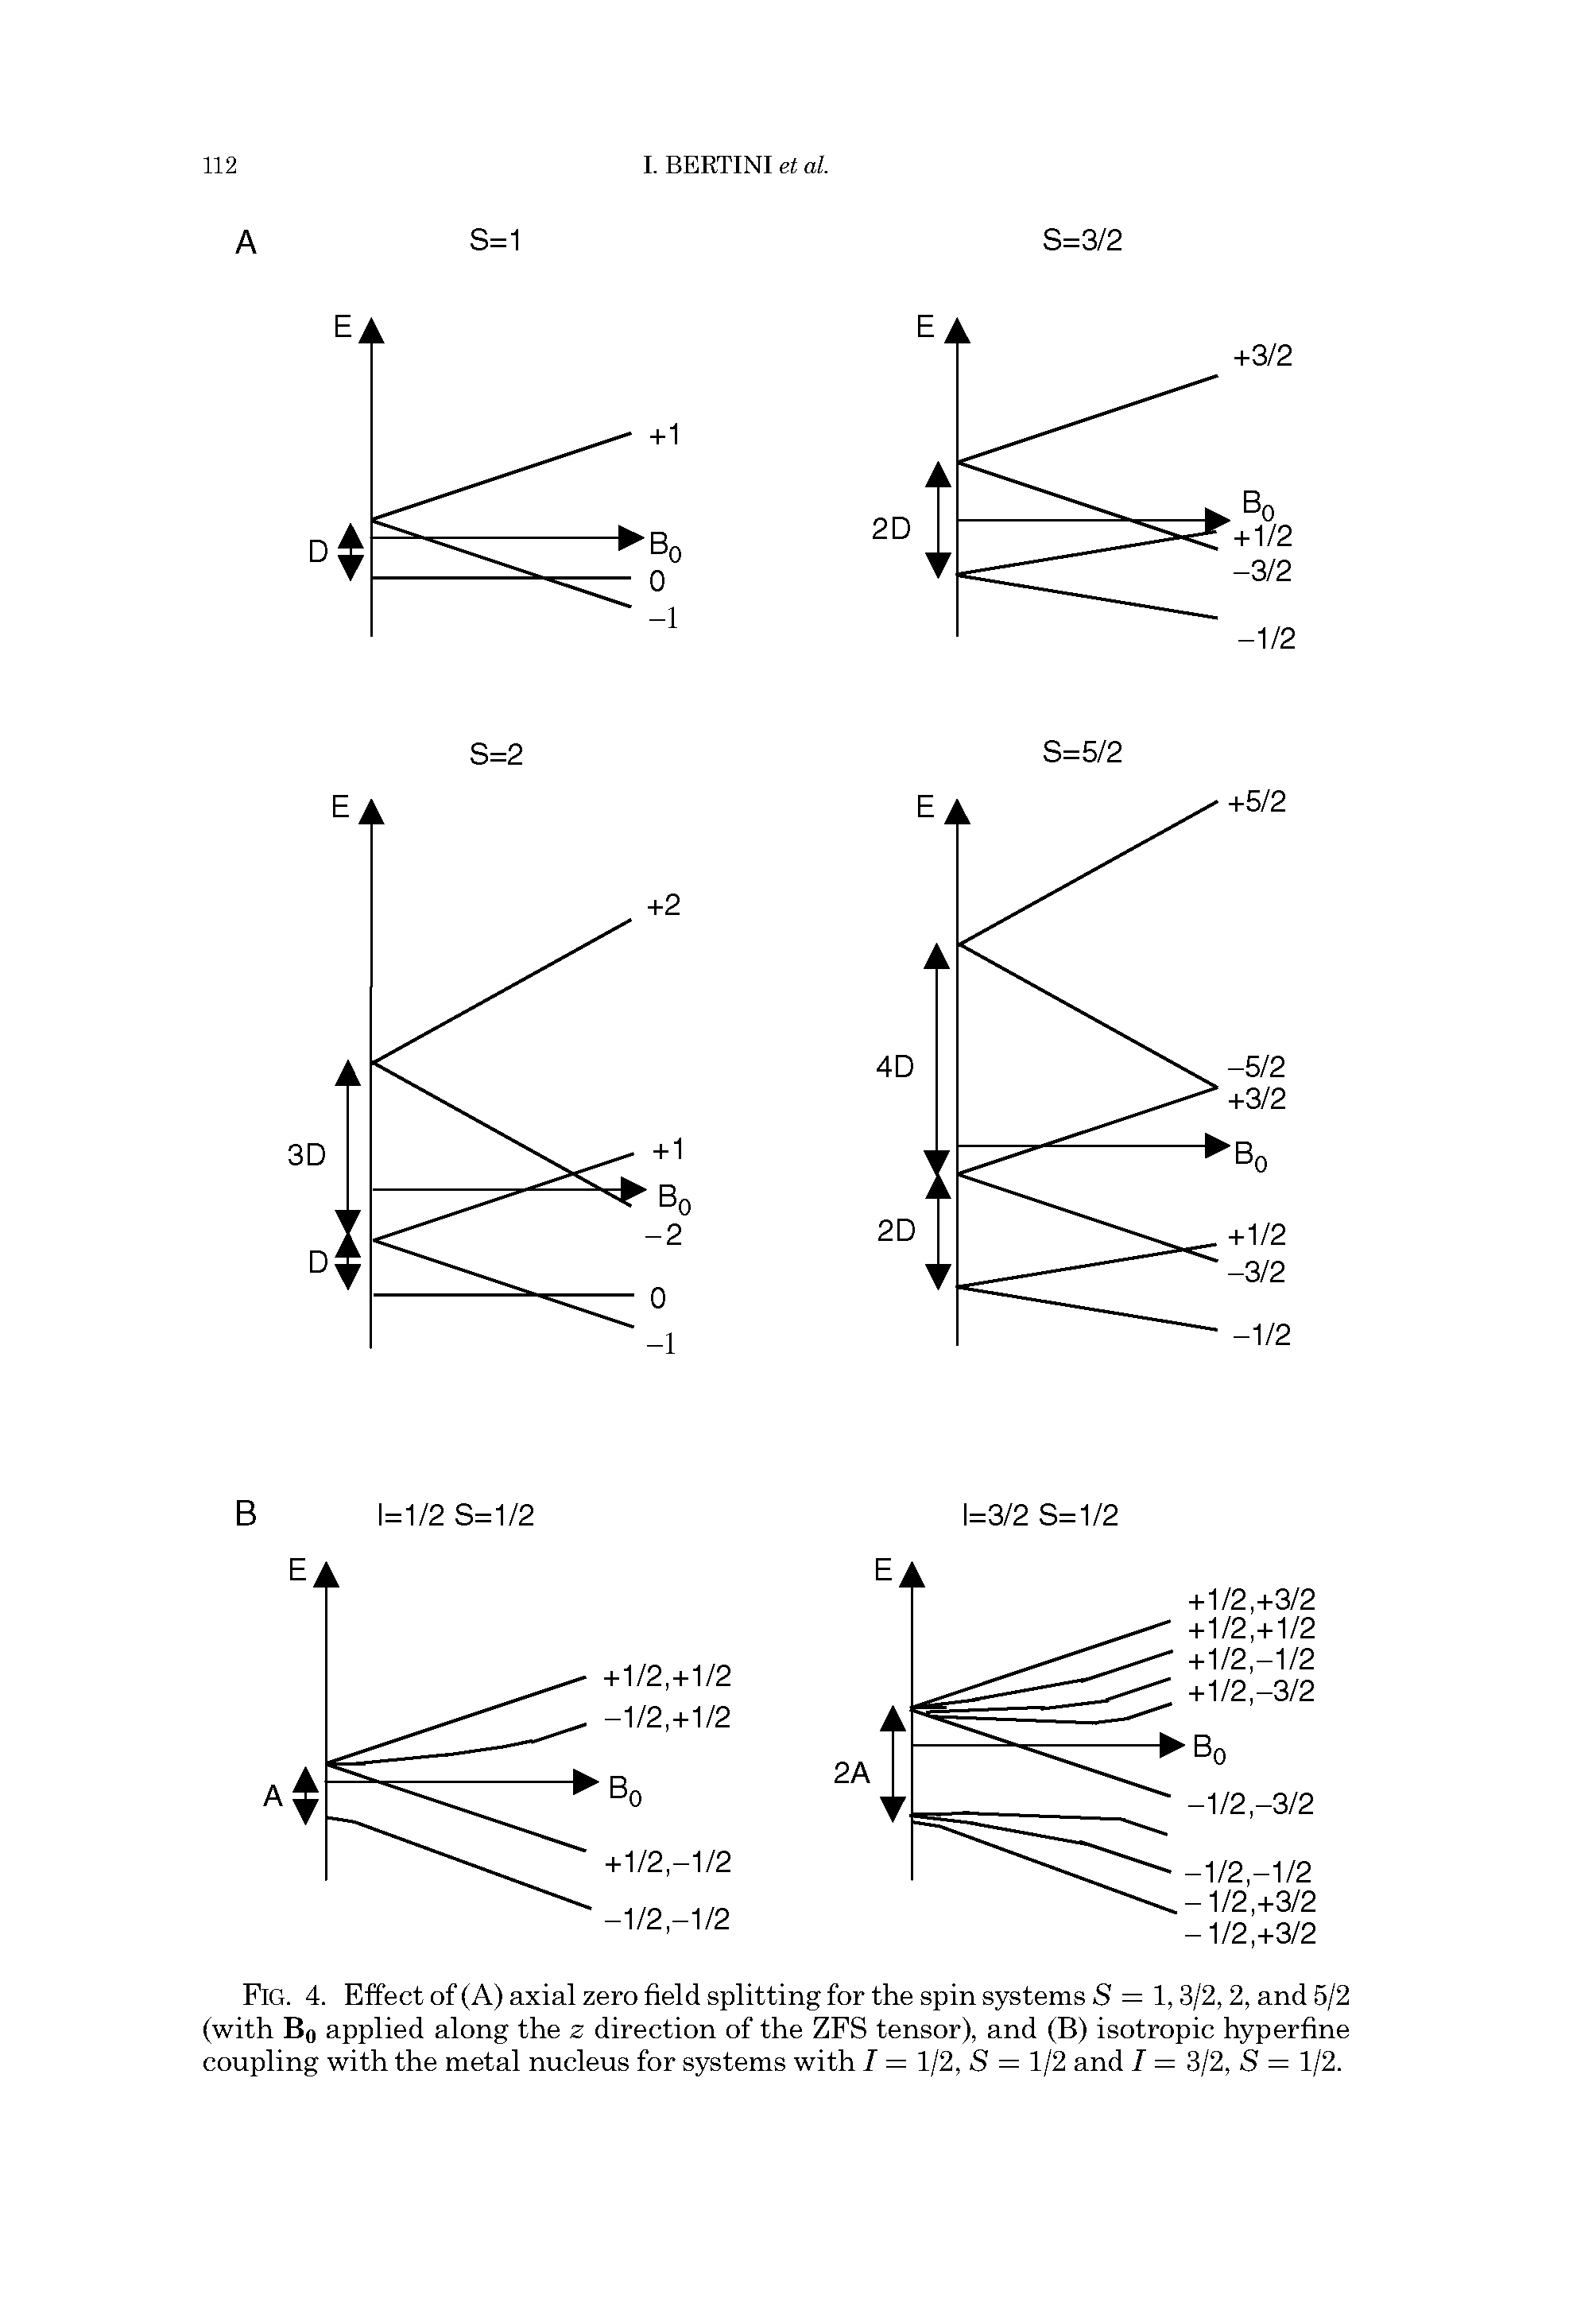 Fig. 4. Effect of (A) axial zero field splitting for the spin systems S = 1,3/2,2, and 5/2 (with Bo applied along the z direction of the ZFS tensor), and (B) isotropic hyperfine coupling with the metal nucleus for systems with I = 1/2, S = 1/2 and I = 3/2, S = 1/2.